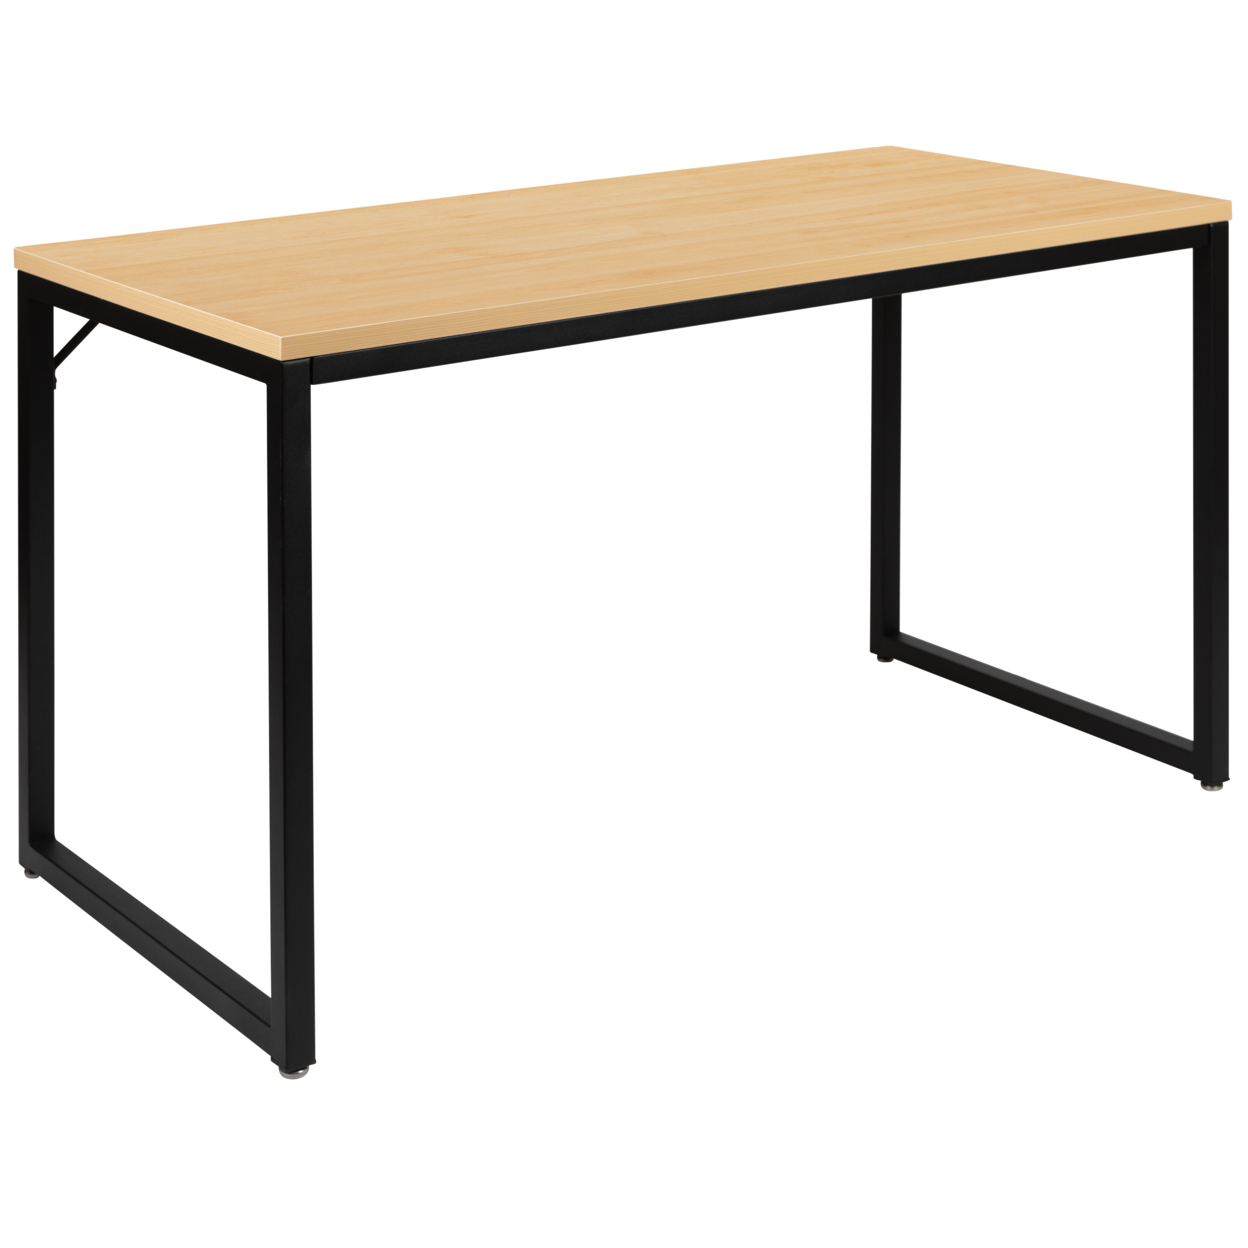 Tiverton Industrial Modern Desk - Commercial Grade Office Computer Desk And Home Office Desk - 47 Long (Maple And Black)